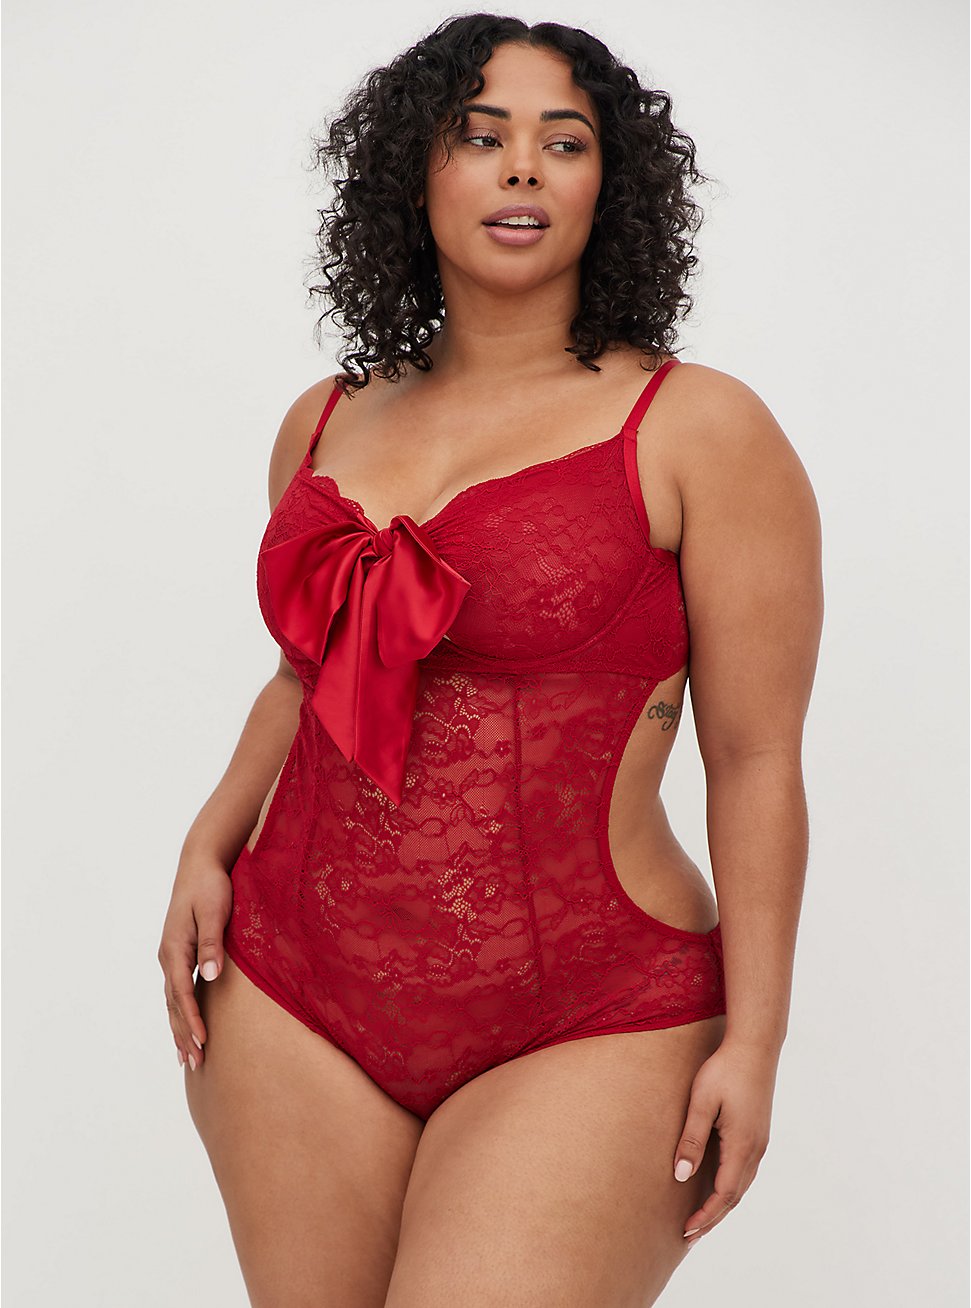 Plus Size Underwire Bodysuit - Lace & Bow Red, JESTER RED, hi-res